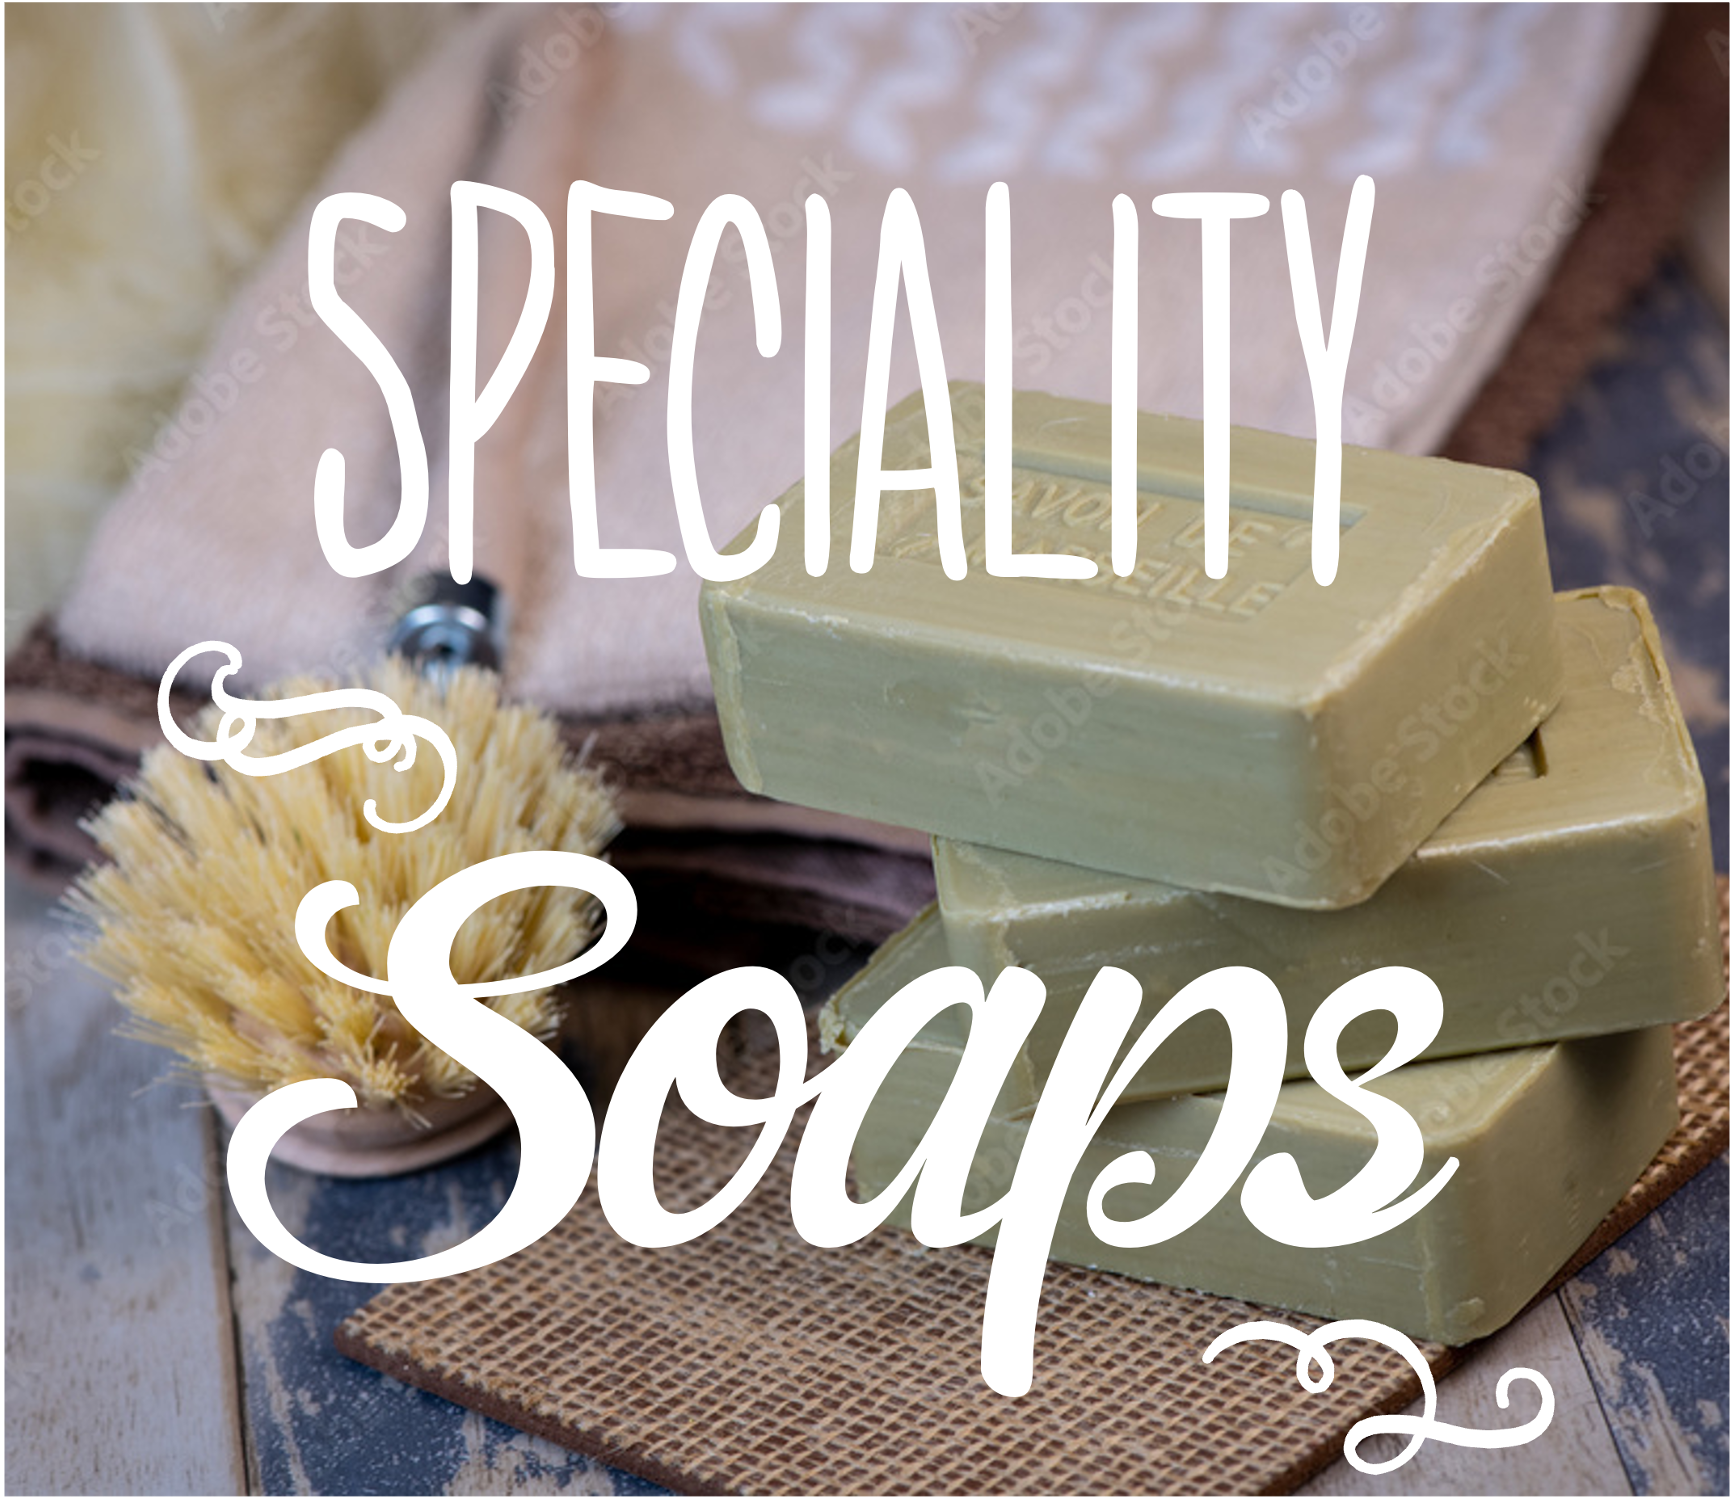 Speciality Soap